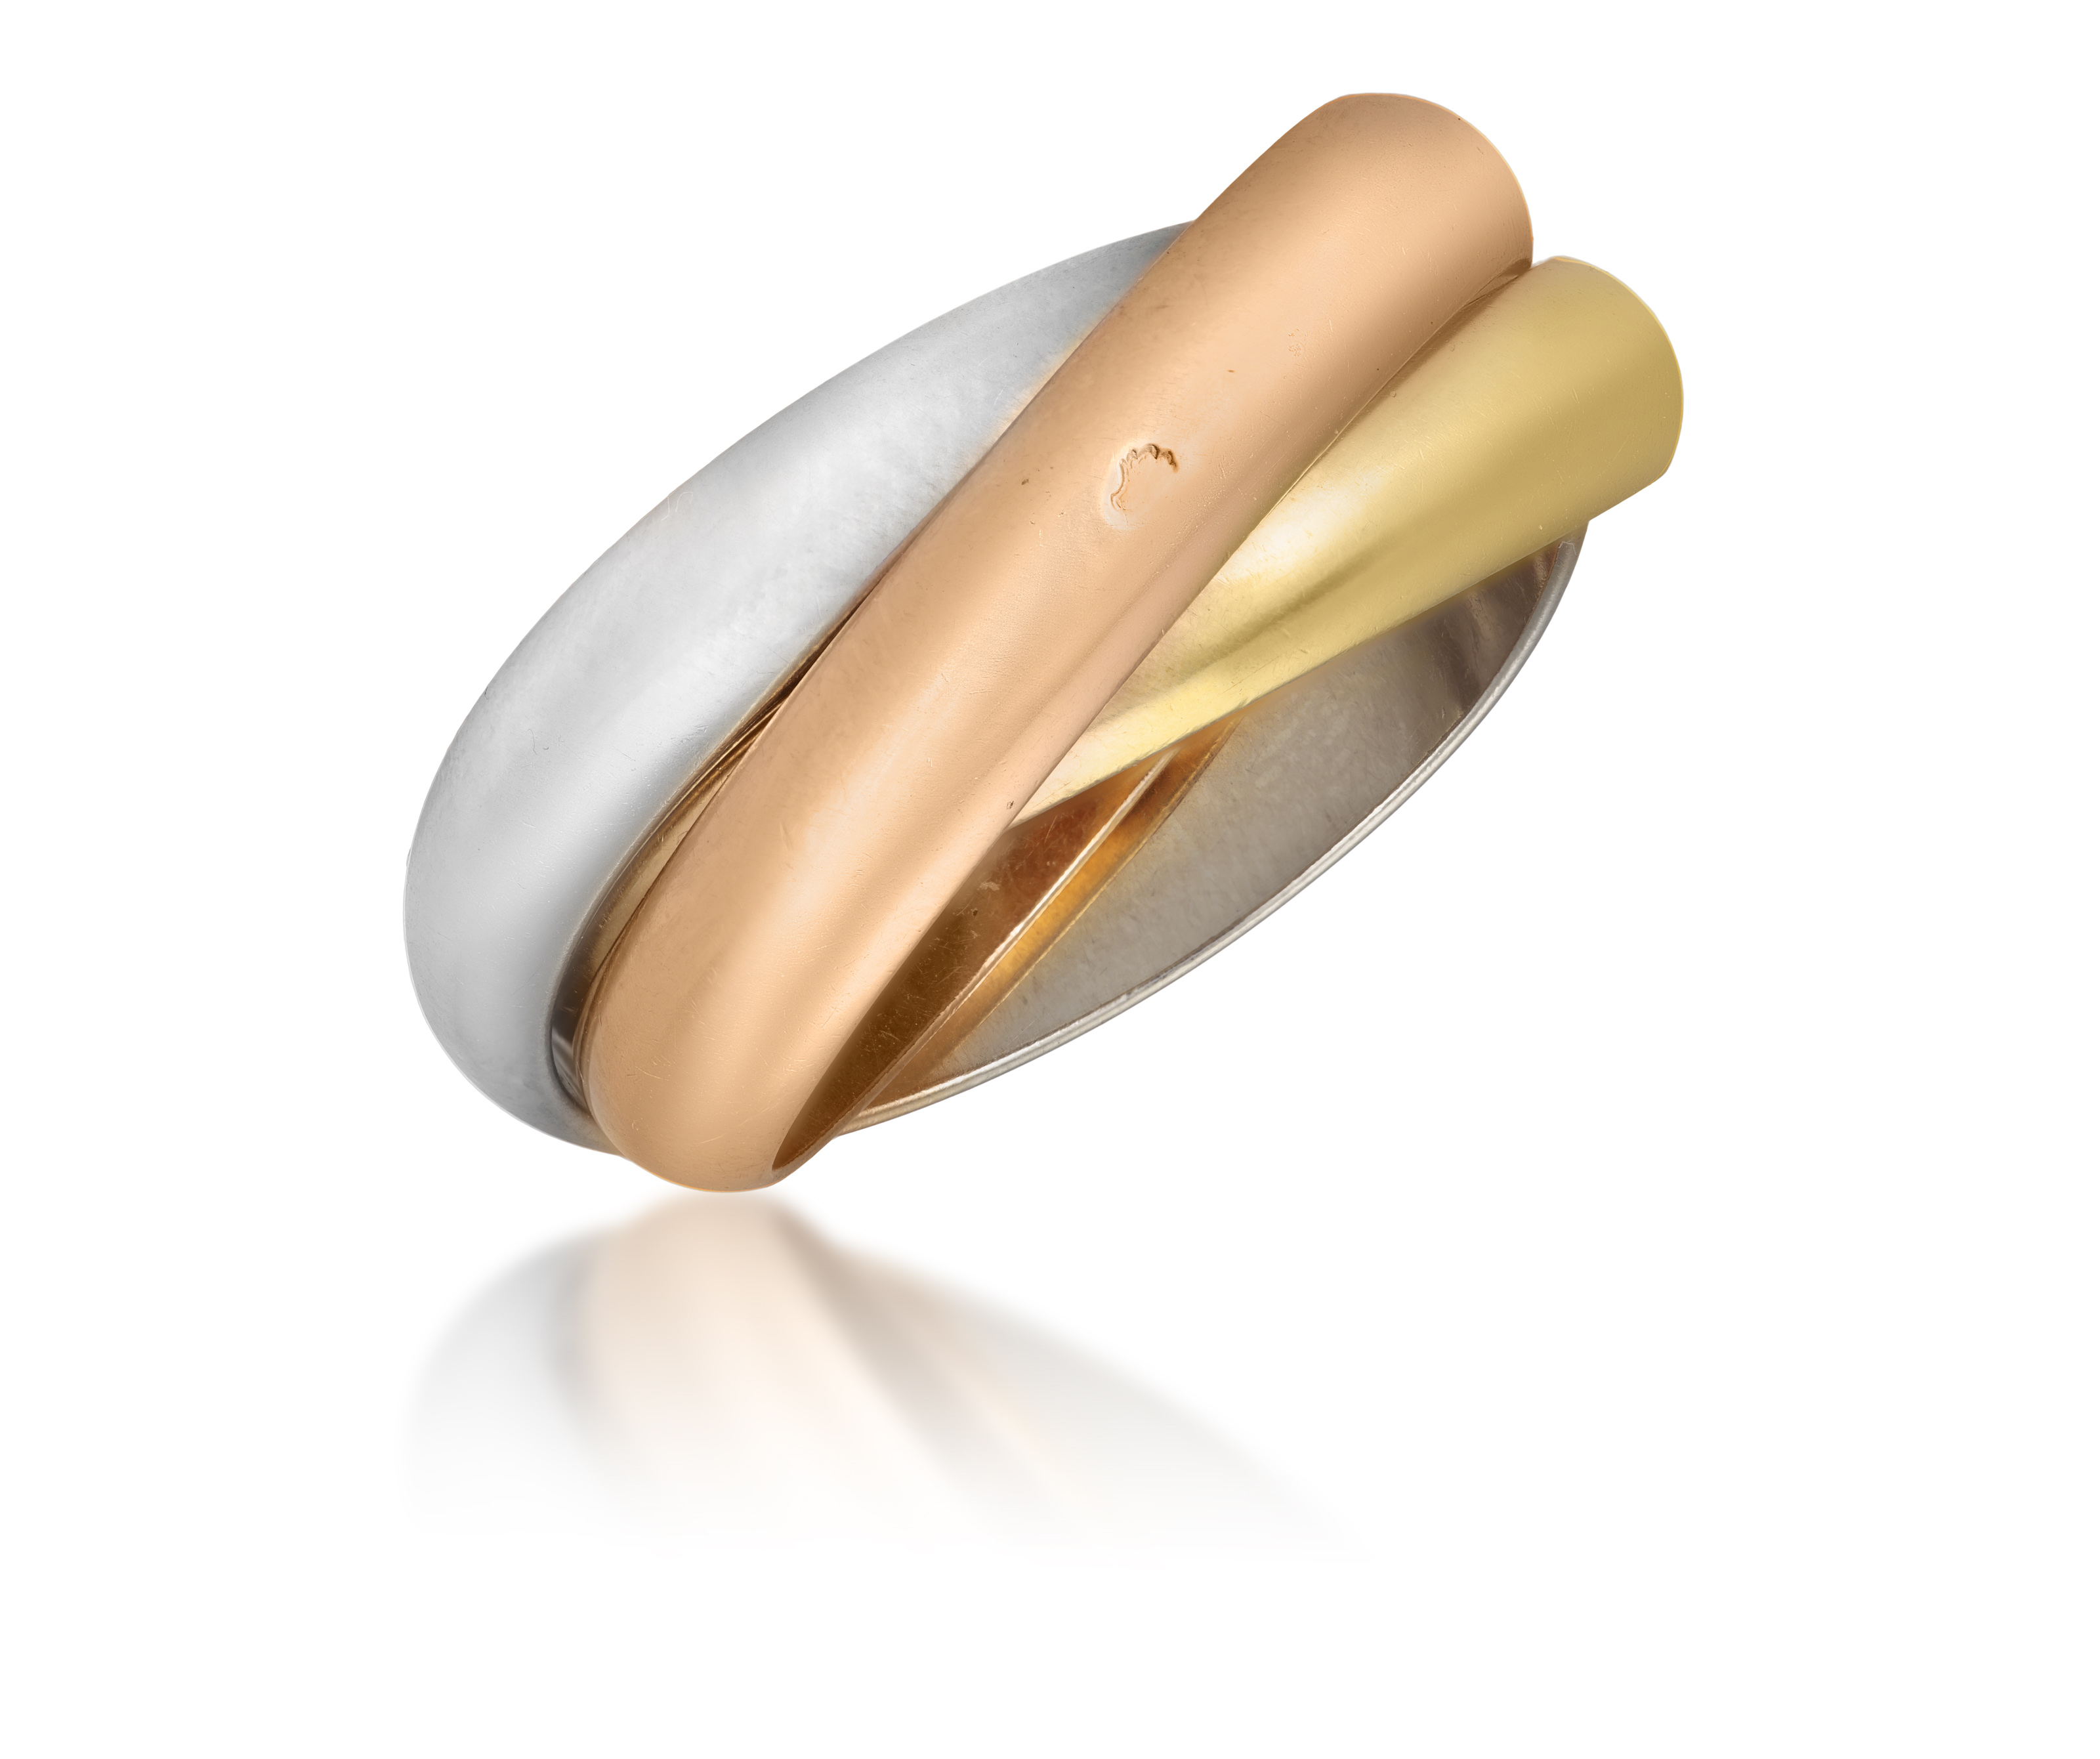 A GOLD ‘TRINITY’ RING, BY CARTIER, 1997 Composed of three polished interlocking bands in either - Image 2 of 3